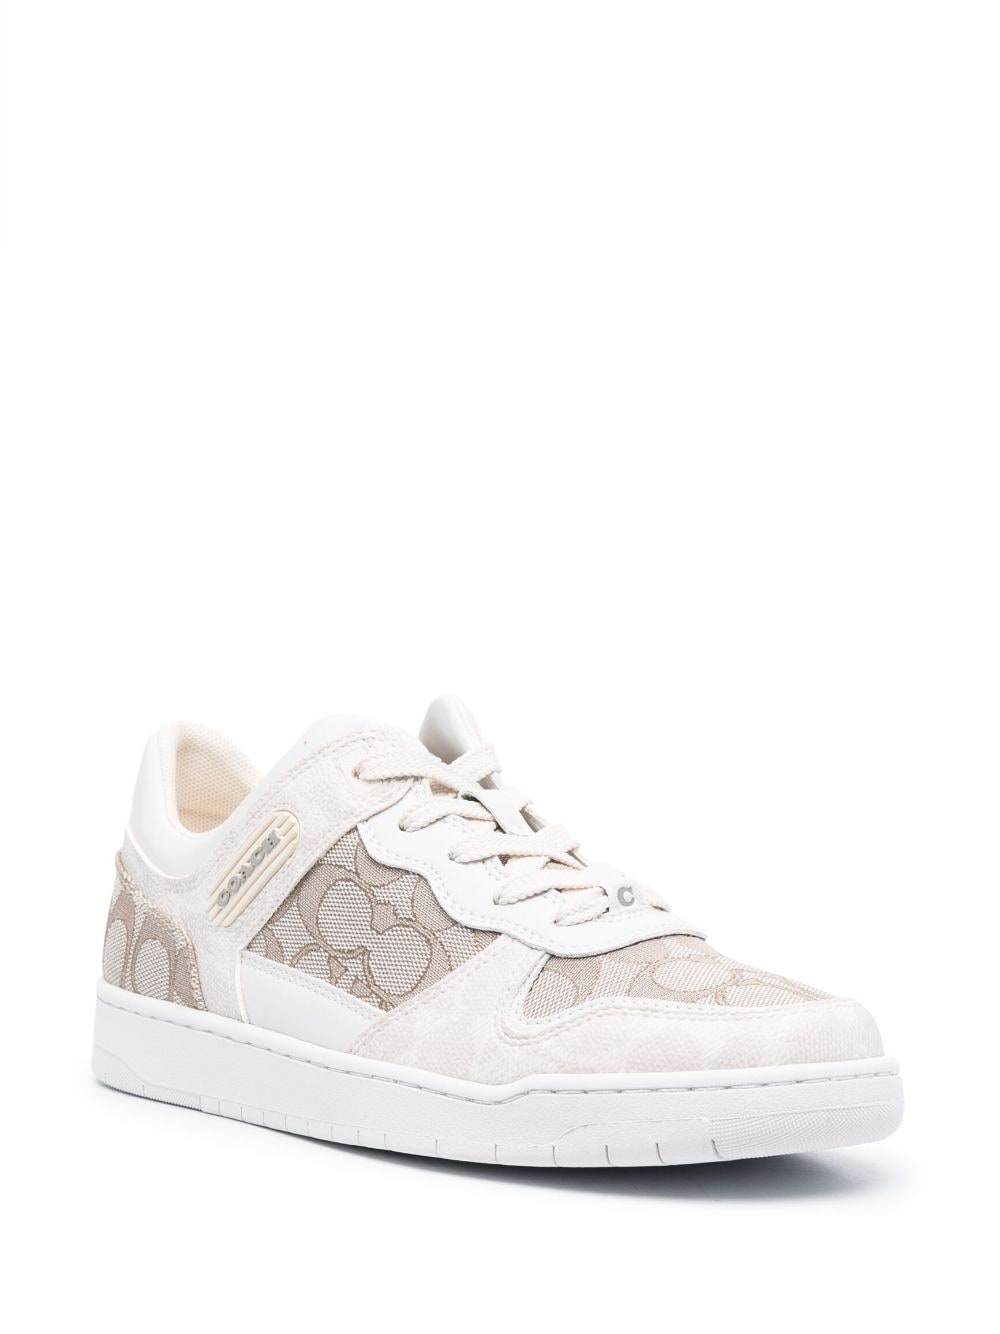 Image 2 of Coach monogram-print lace-up sneakers